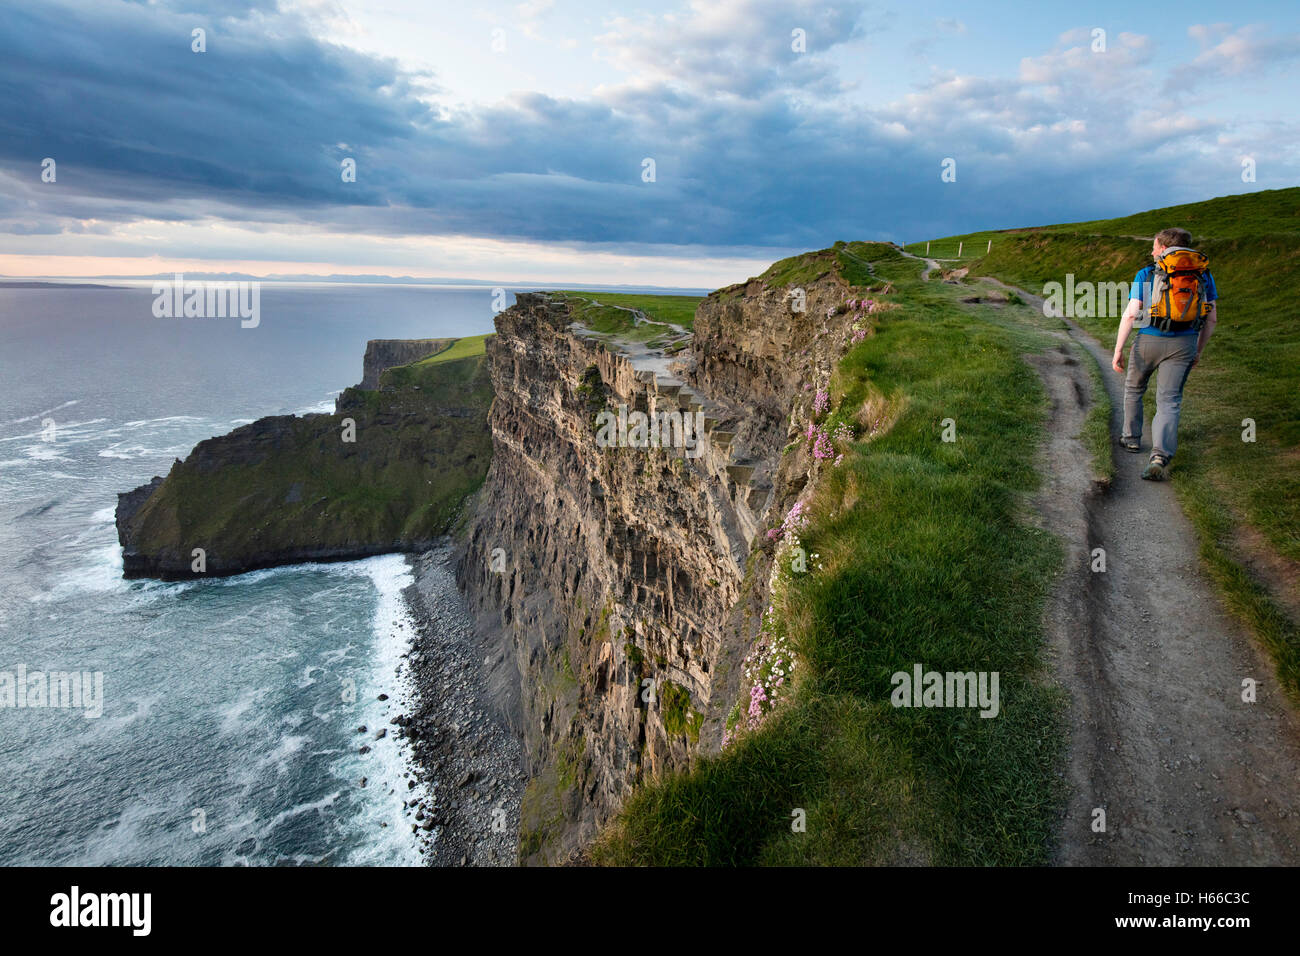 Hiker on top of the Cliffs of Moher, County Clare, Ireland. Stock Photo